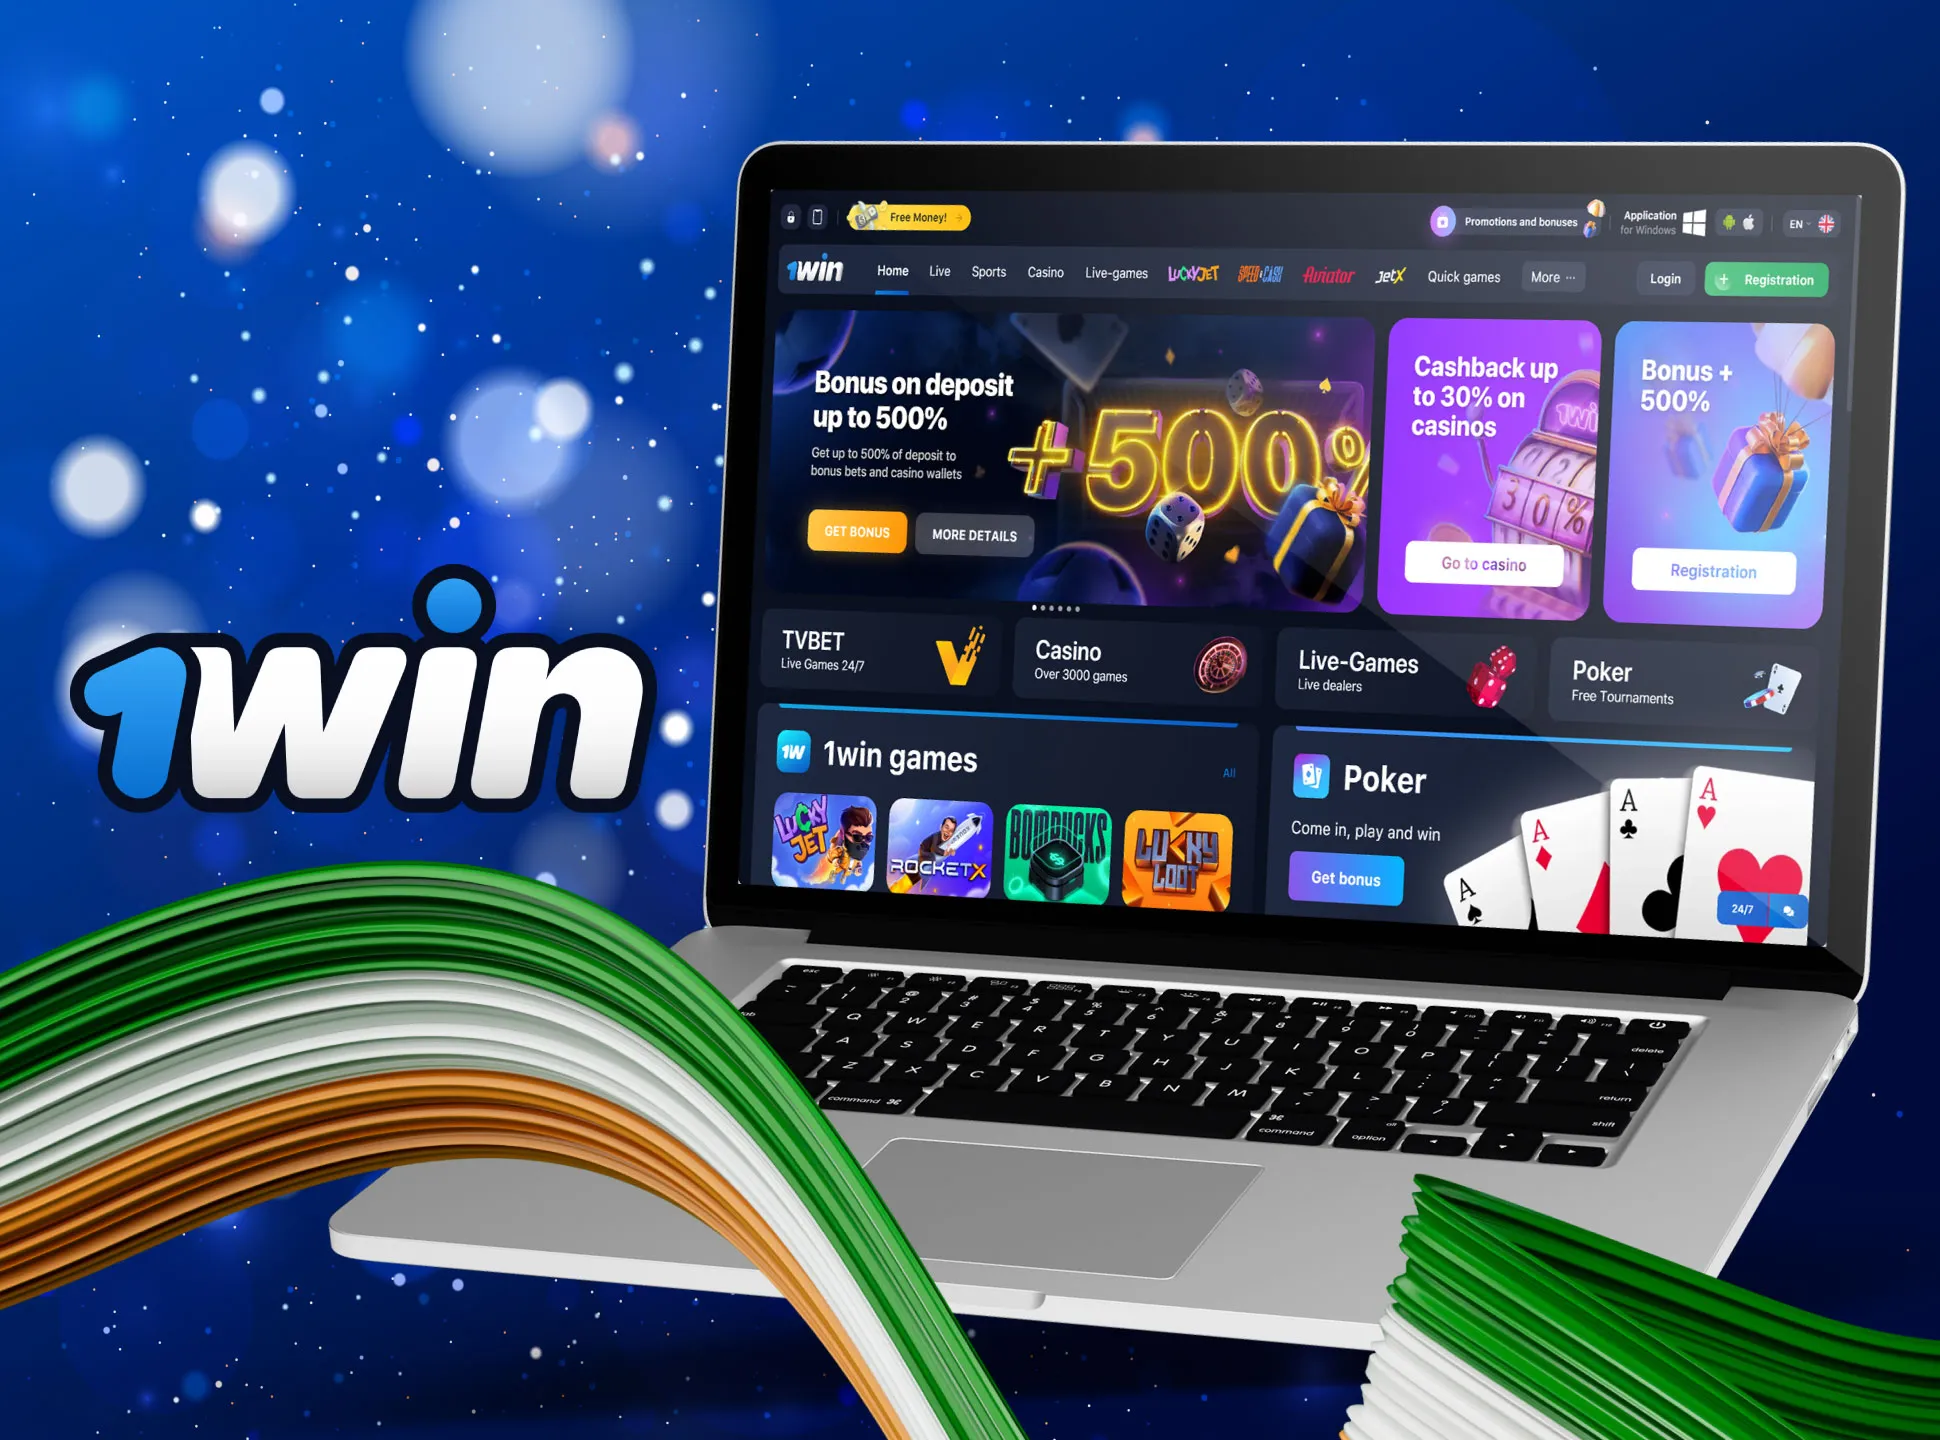 The 1win official website allows betting on sports and playing casino games.